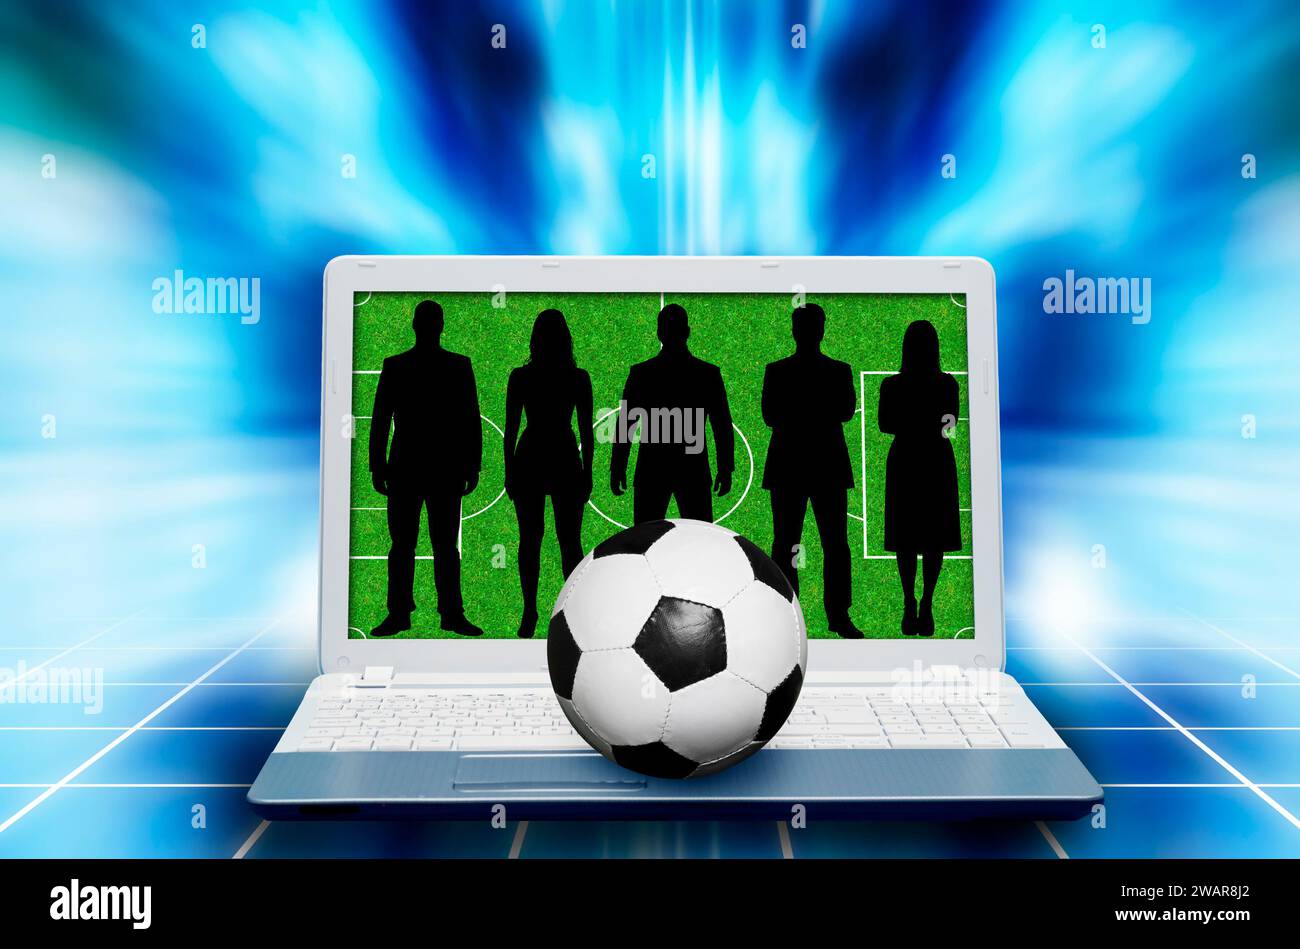 people silhouettes on laptop screen with a soccer pitch and a soccer ball Stock Photo